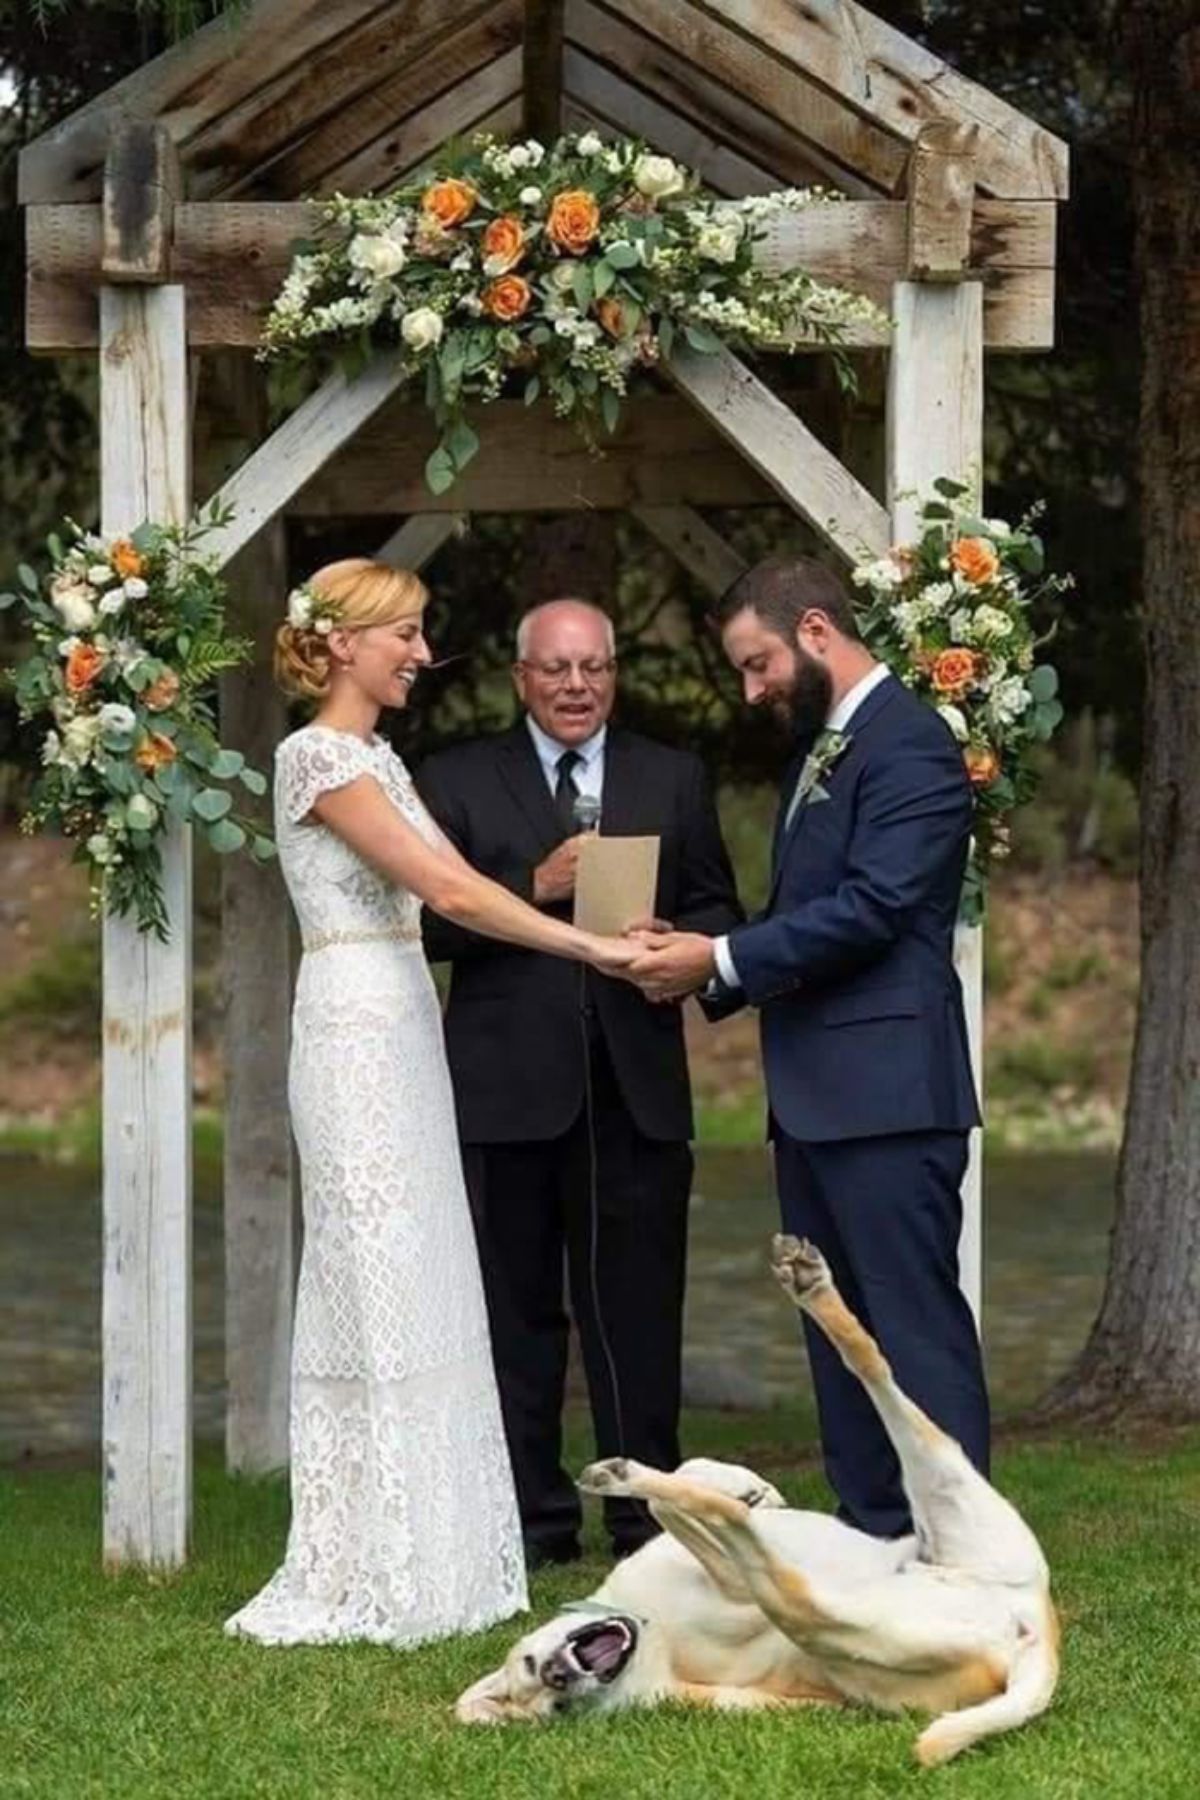 yellow labrador retriever laying on its side and playing in front of a bride and groom getting married in a garden